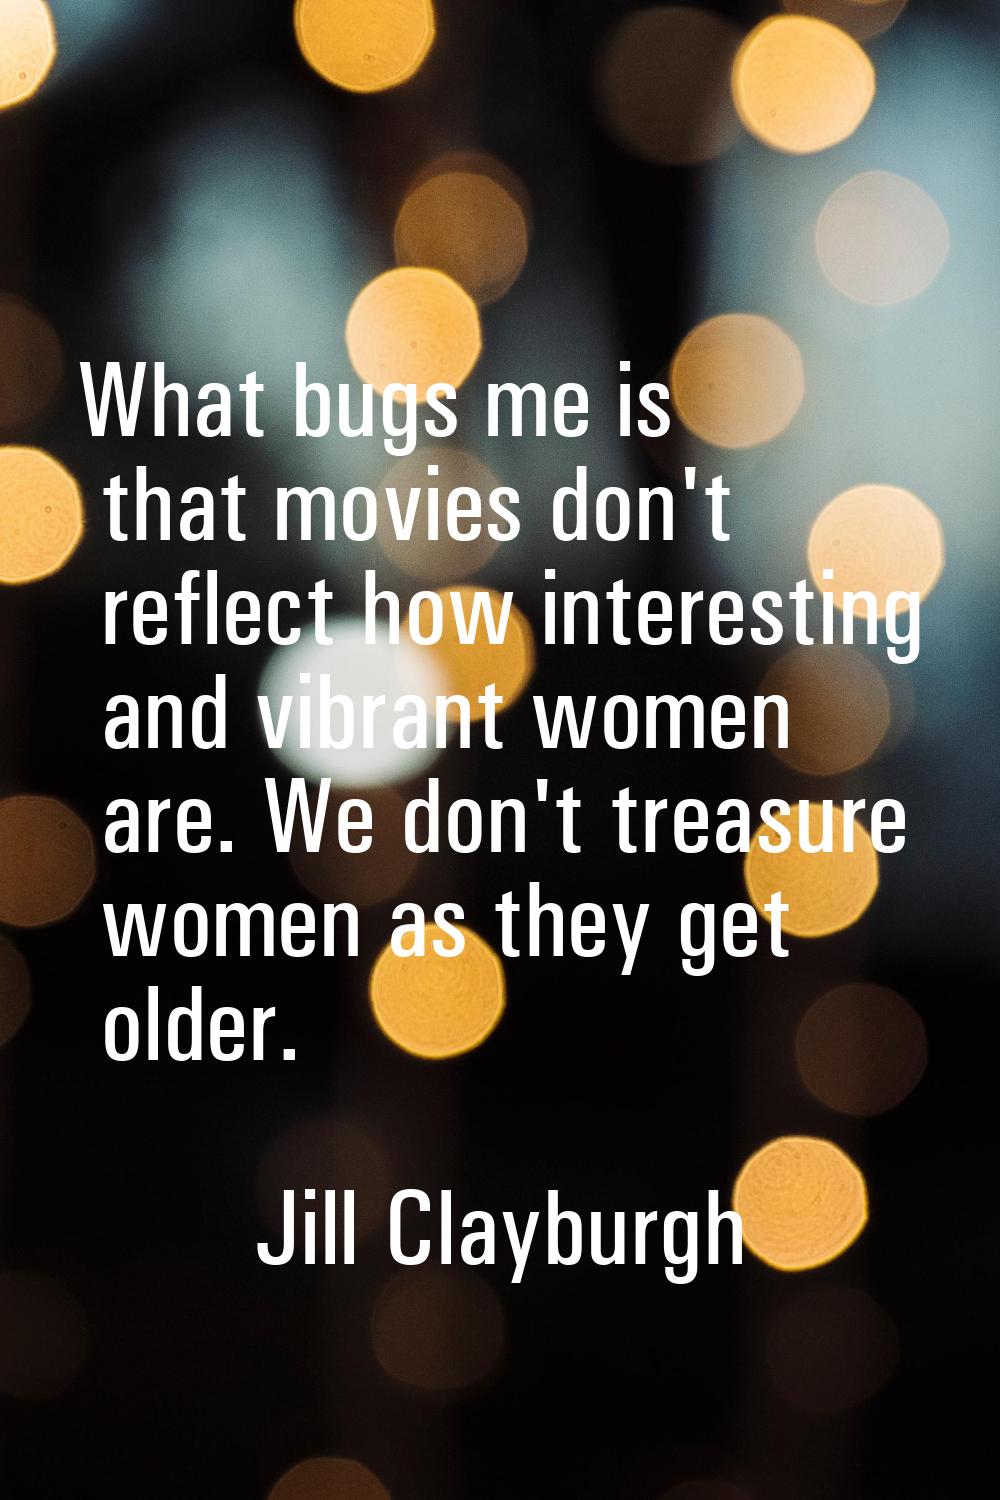 What bugs me is that movies don't reflect how interesting and vibrant women are. We don't treasure 